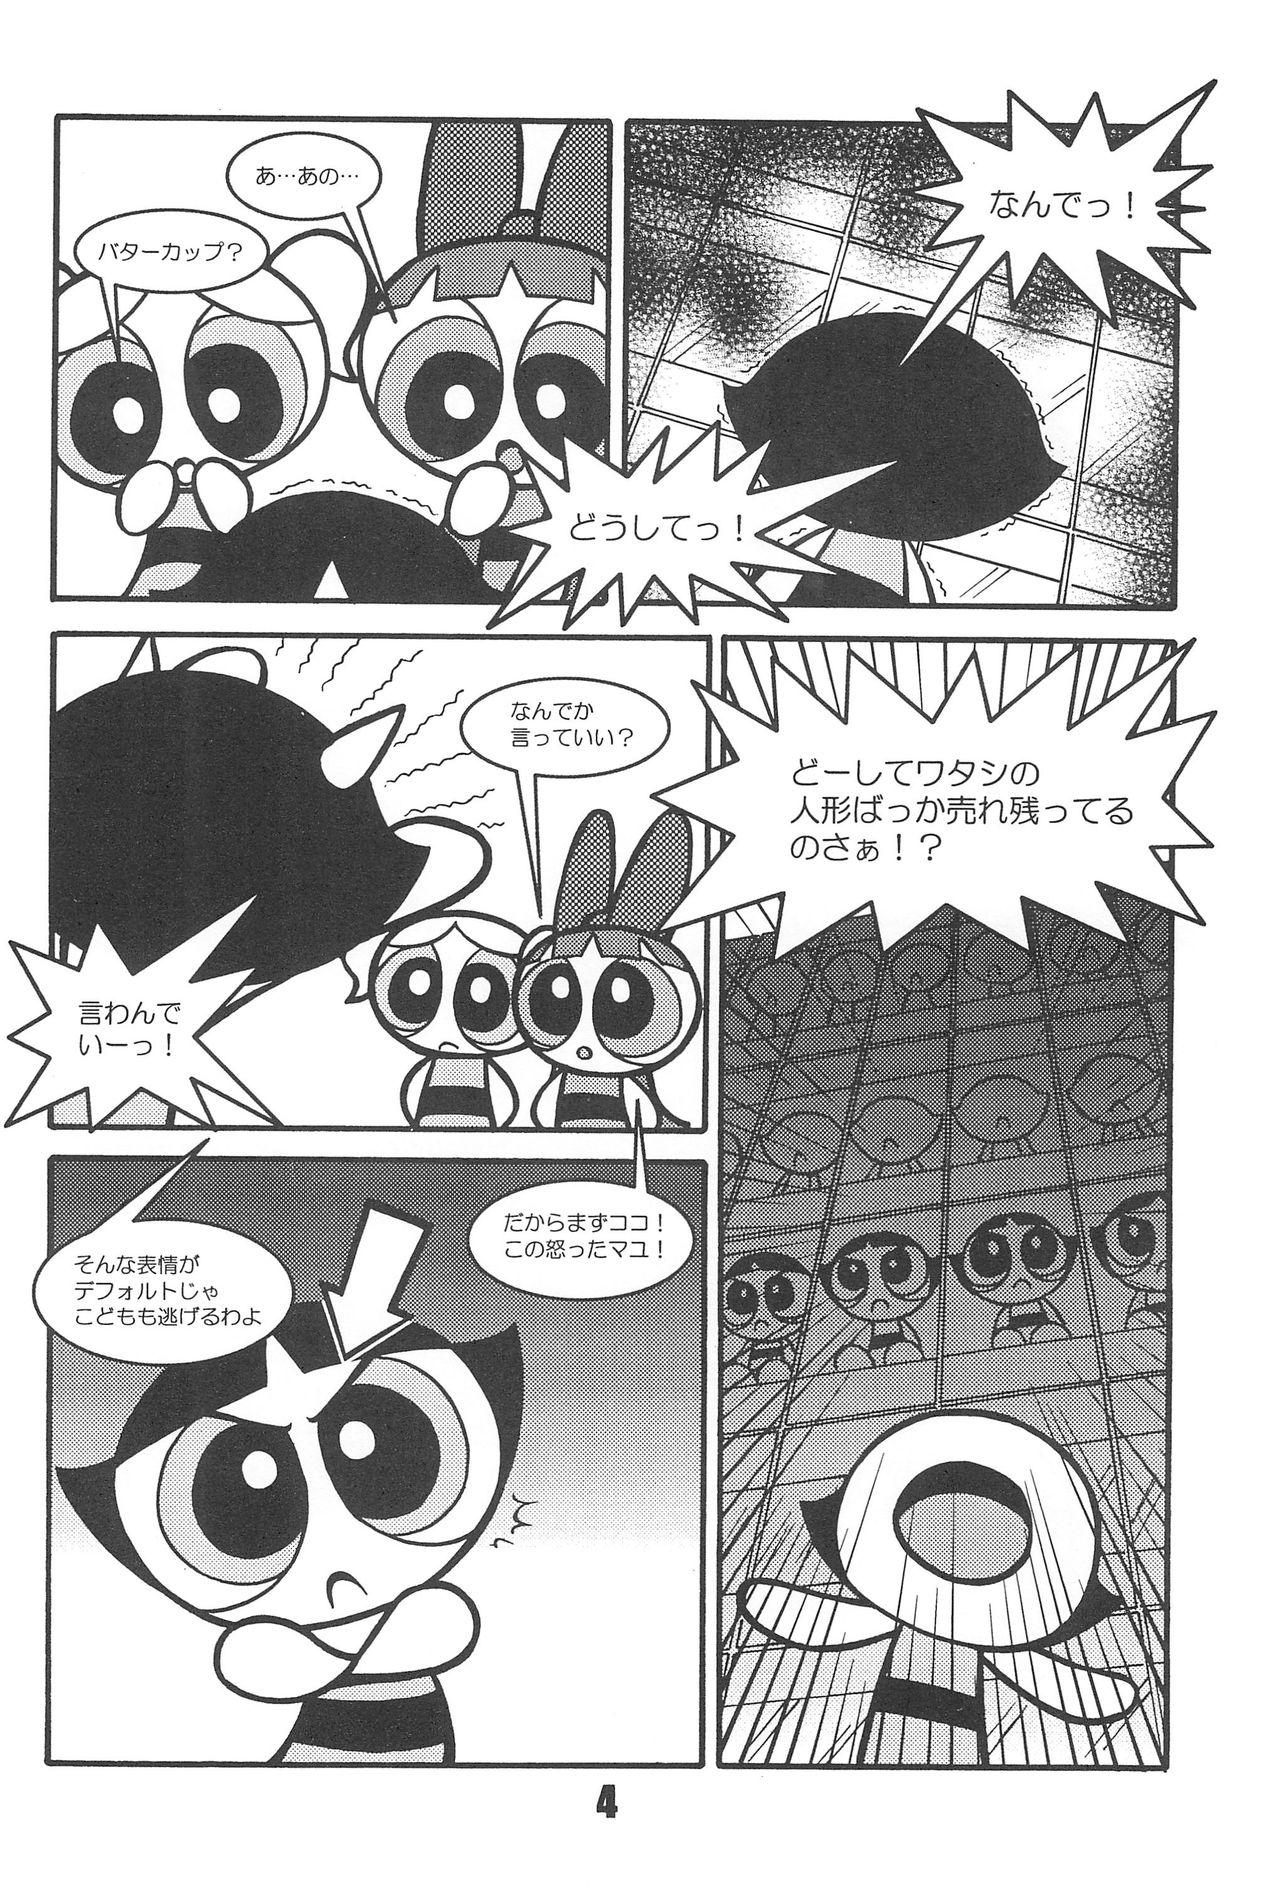 Milk Show Goes On! Funhouse 22th - The powerpuff girls Sola - Page 4